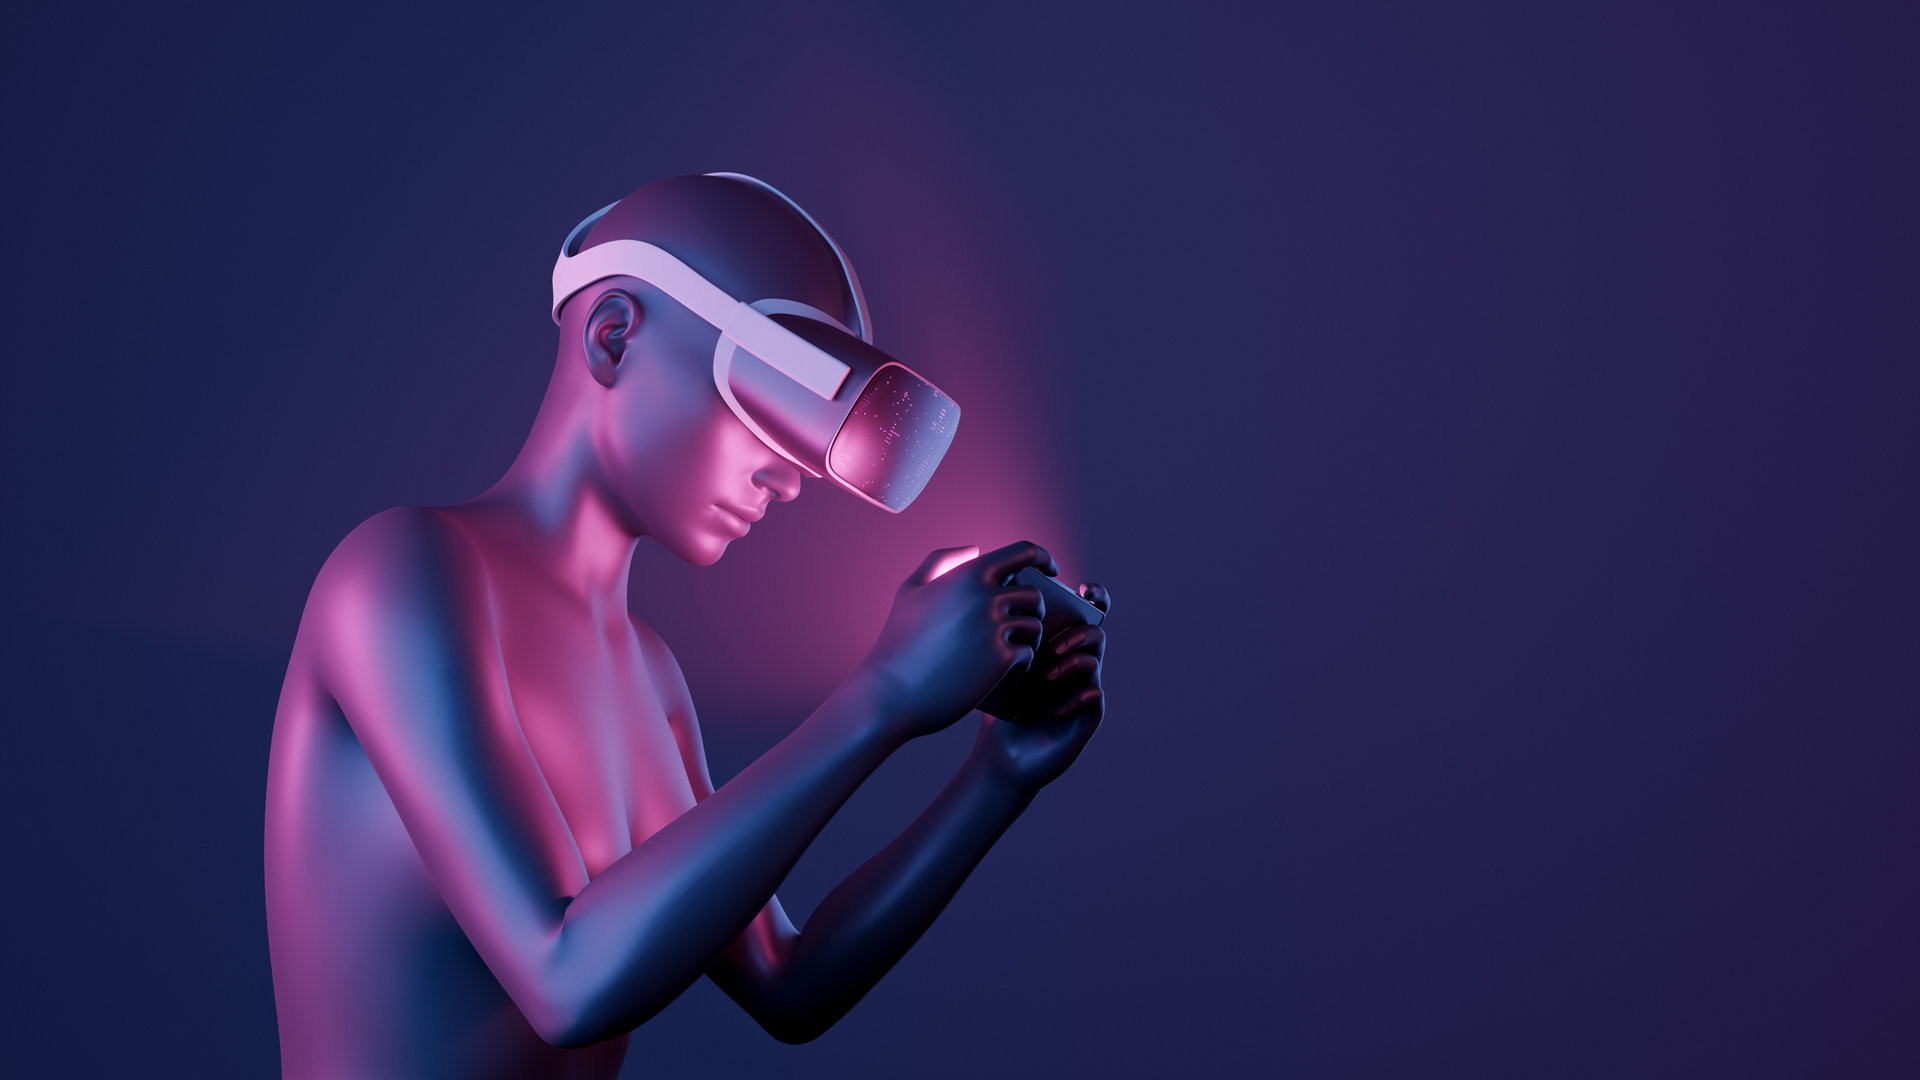 3d girl with virtual reality glasses playing with mobile phone. neon lights. futuristic concept of metaverse, play to earn, nft and cryptocurrencies. 3d rendering